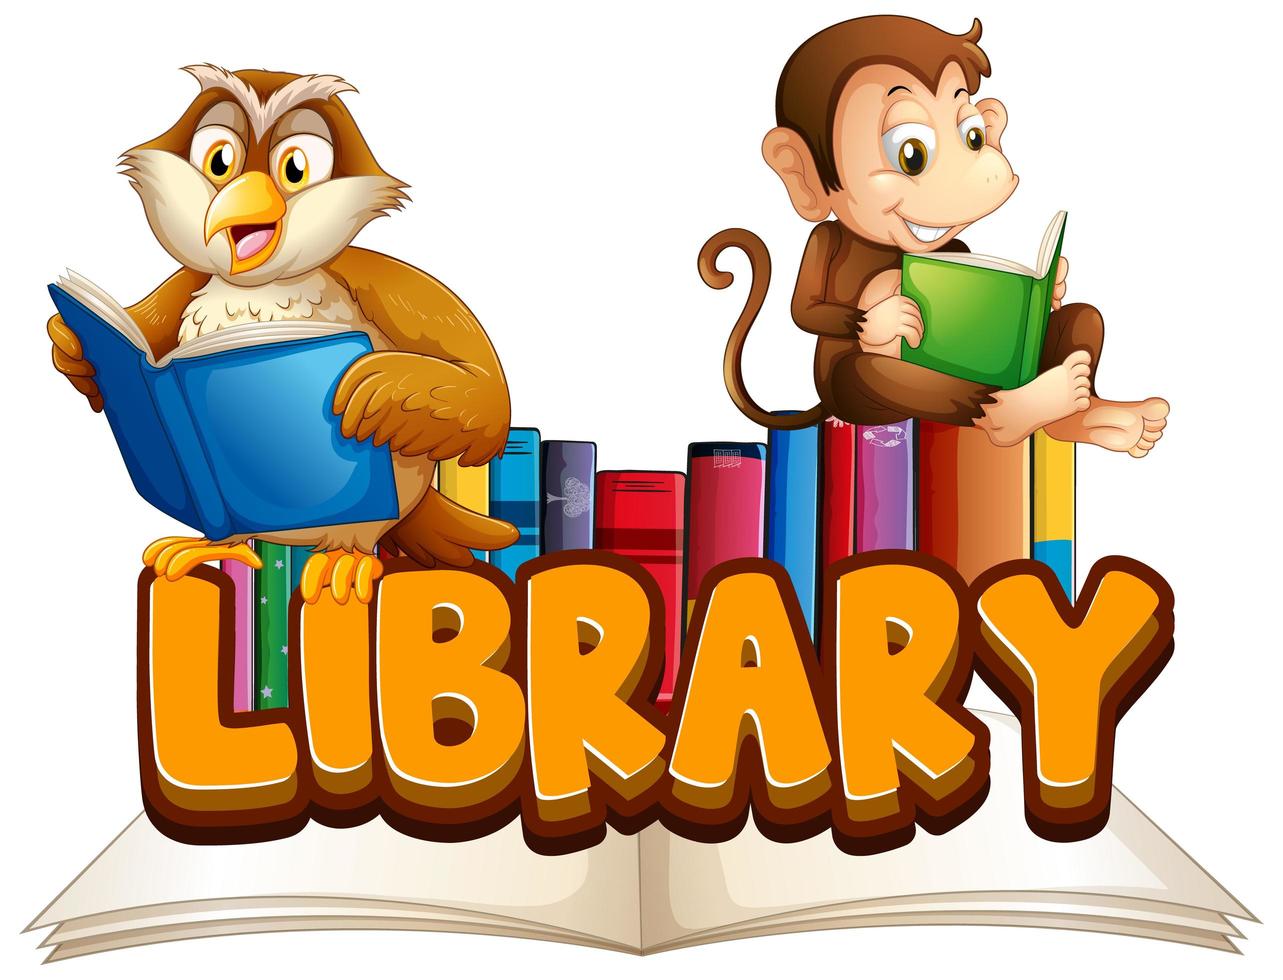 Download Library with animals reading book - Download Free Vectors, Clipart Graphics & Vector Art